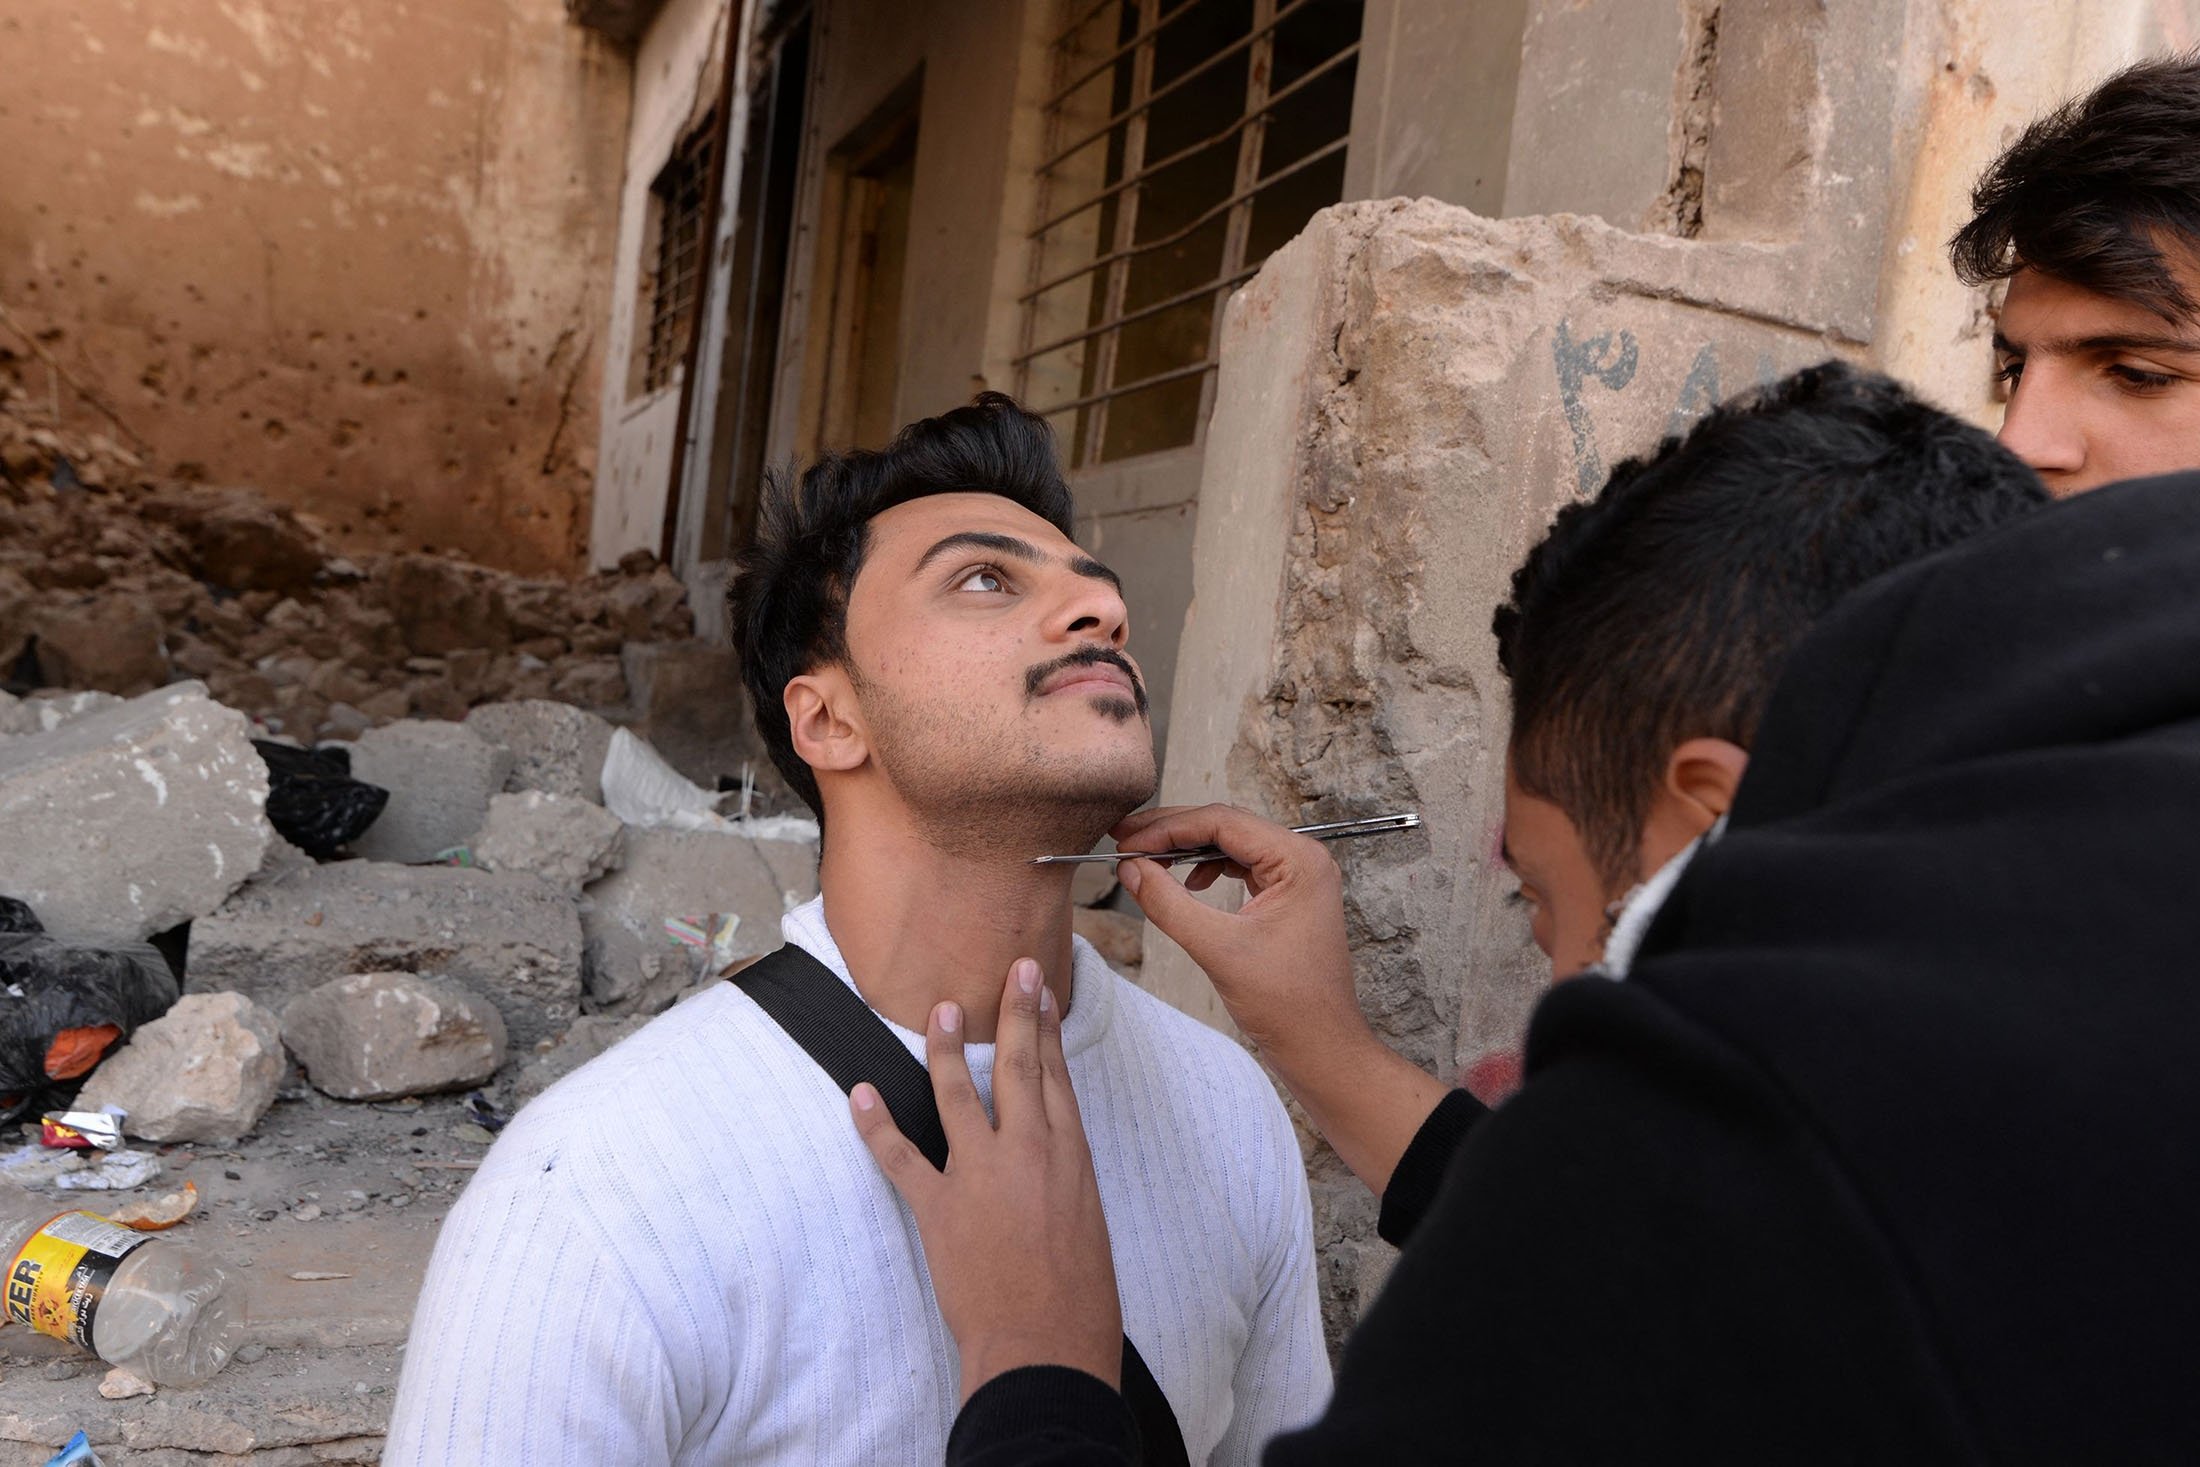 Makeup artists at a film school prepare an actor before filming a scene in the war-ravaged Iraqi city of Mosul, December 15, 2021 (AFP Photo)